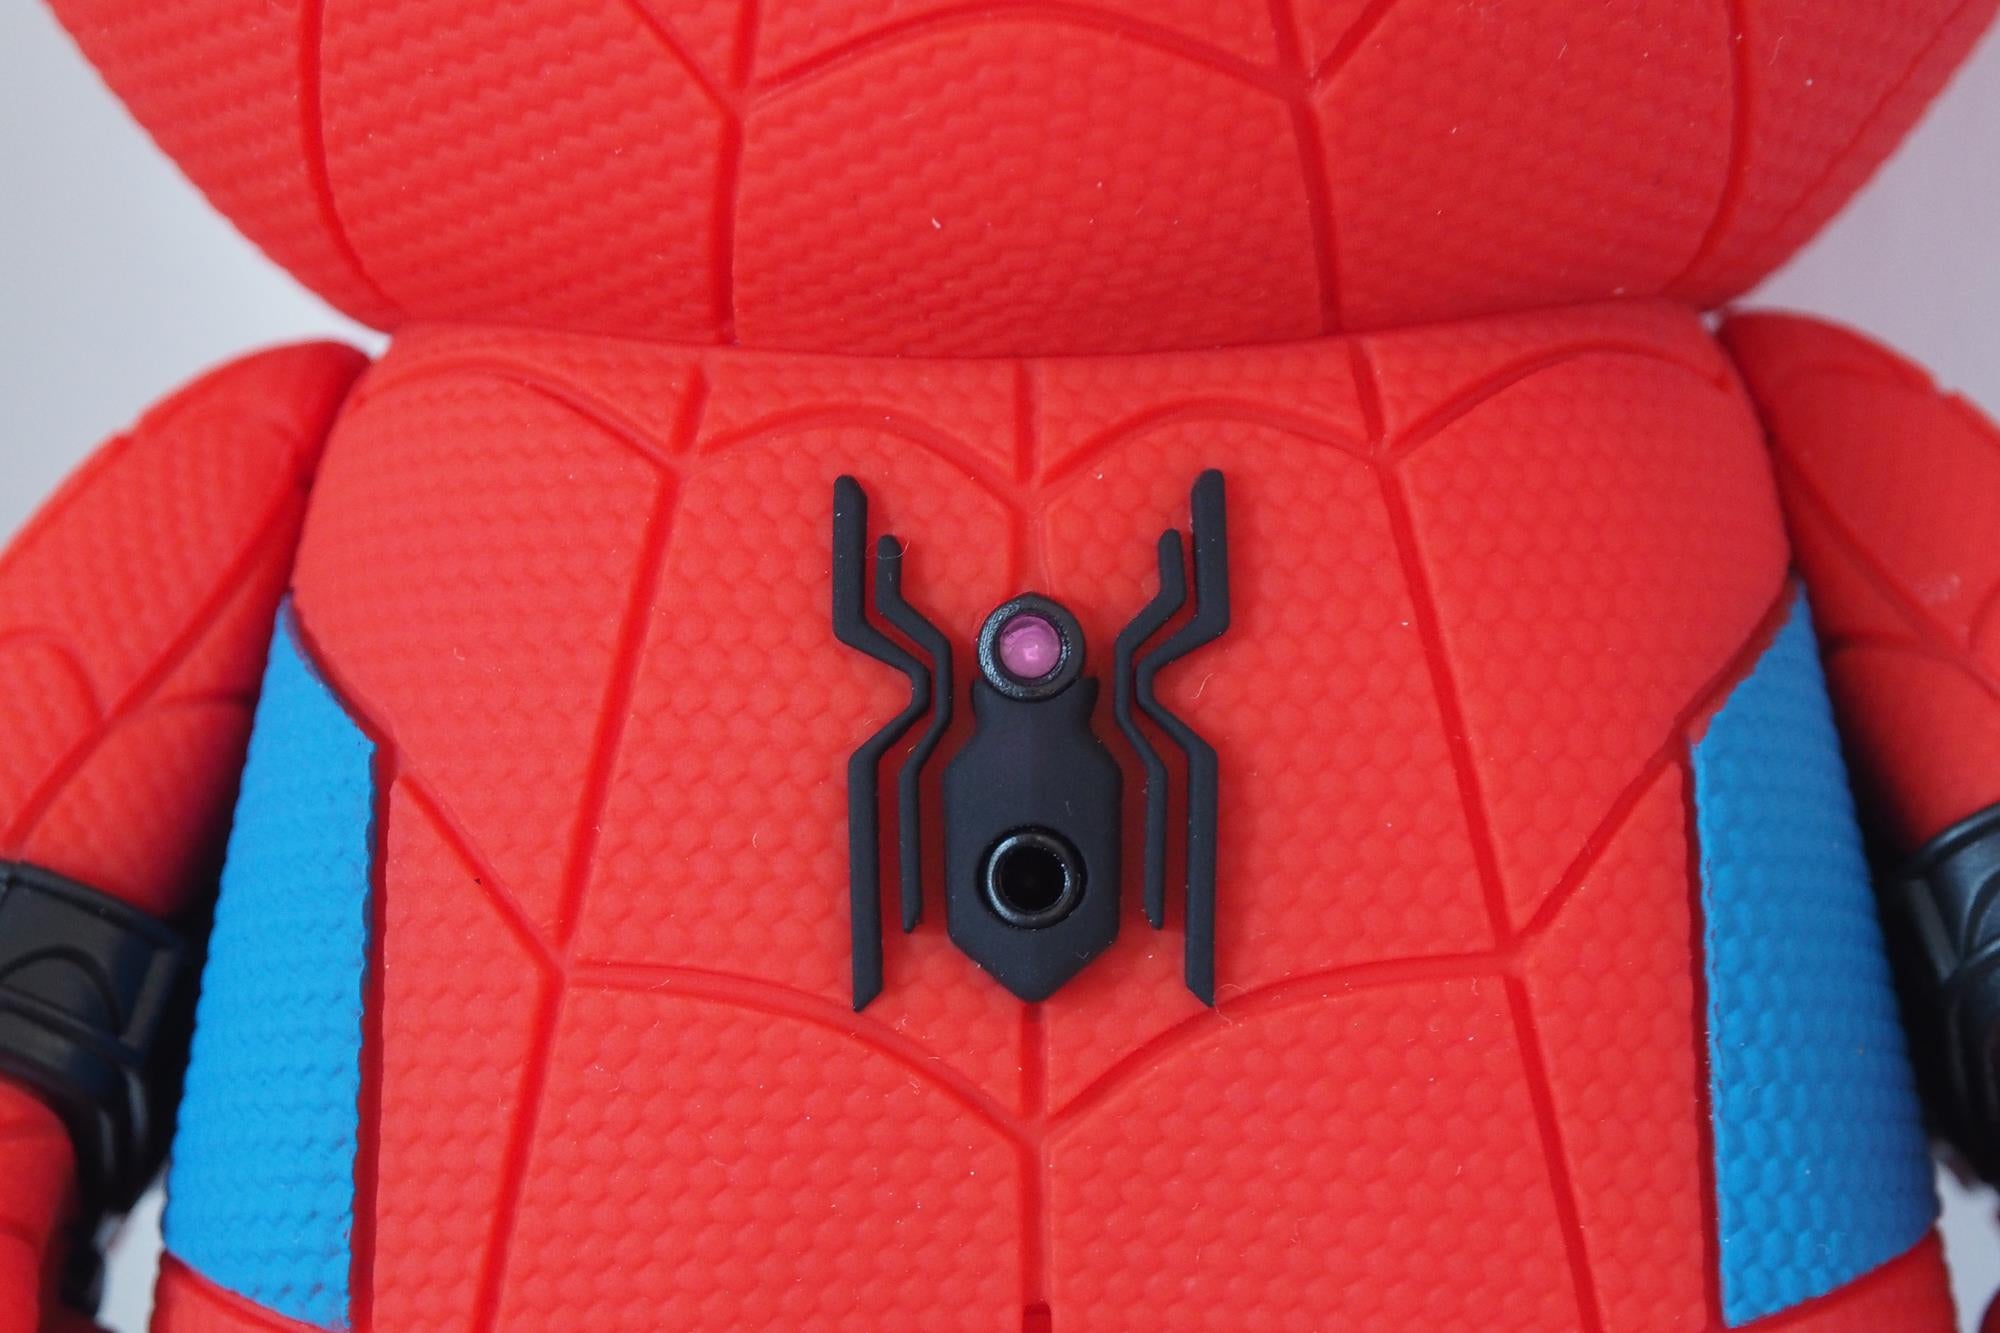 Close-up of Sphero Spider-Man interactive toy's chest detail.